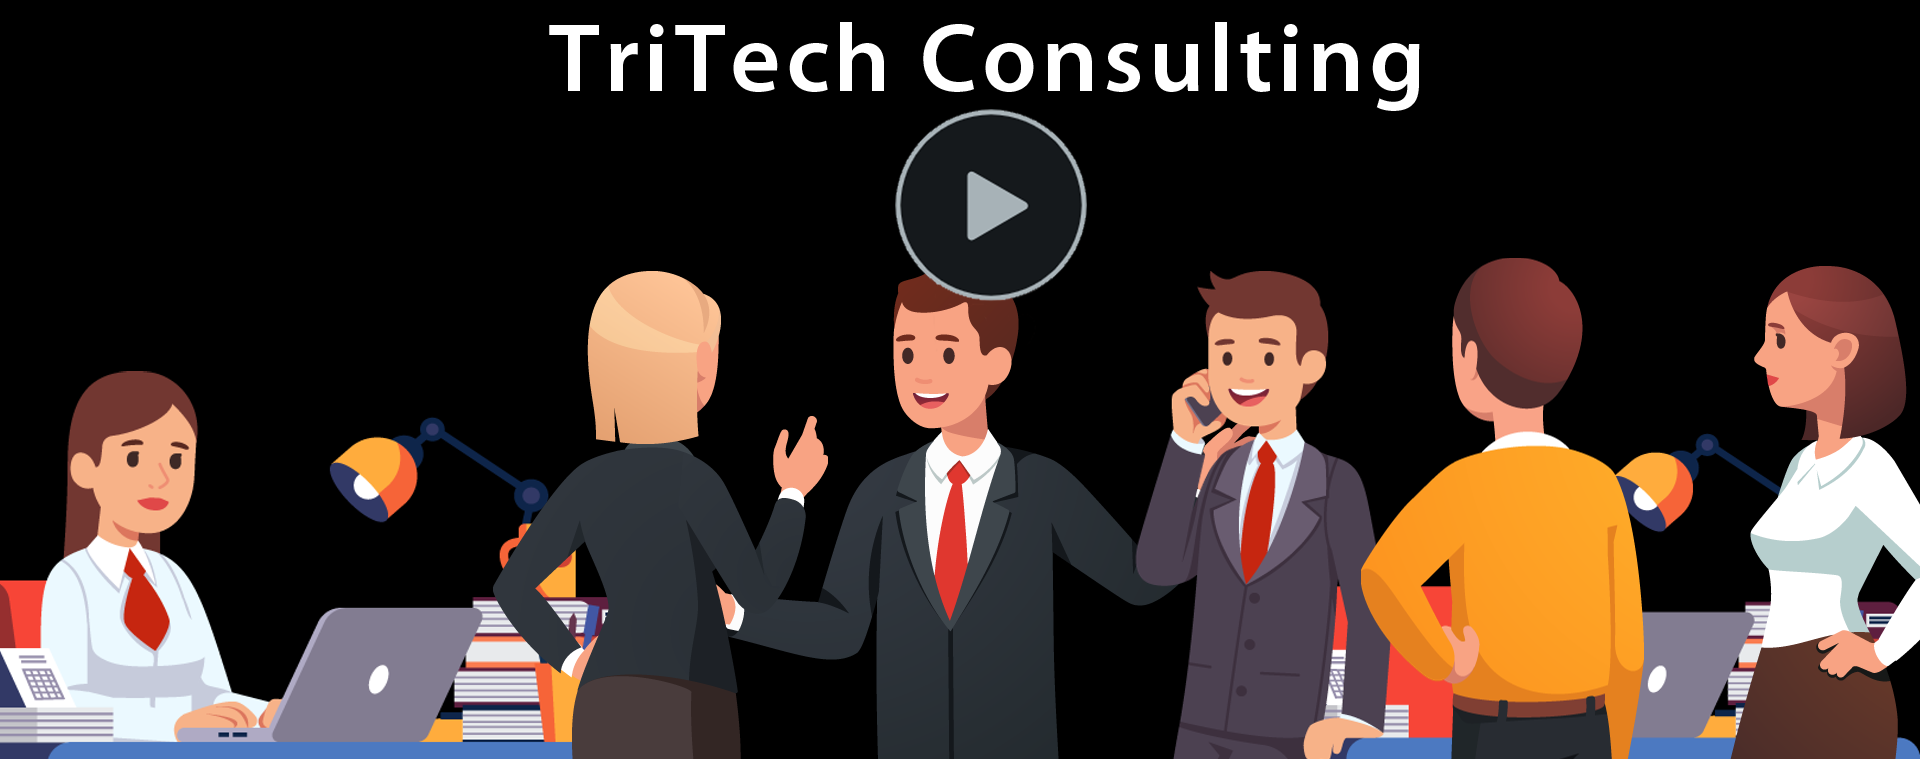 TriTech Consulting